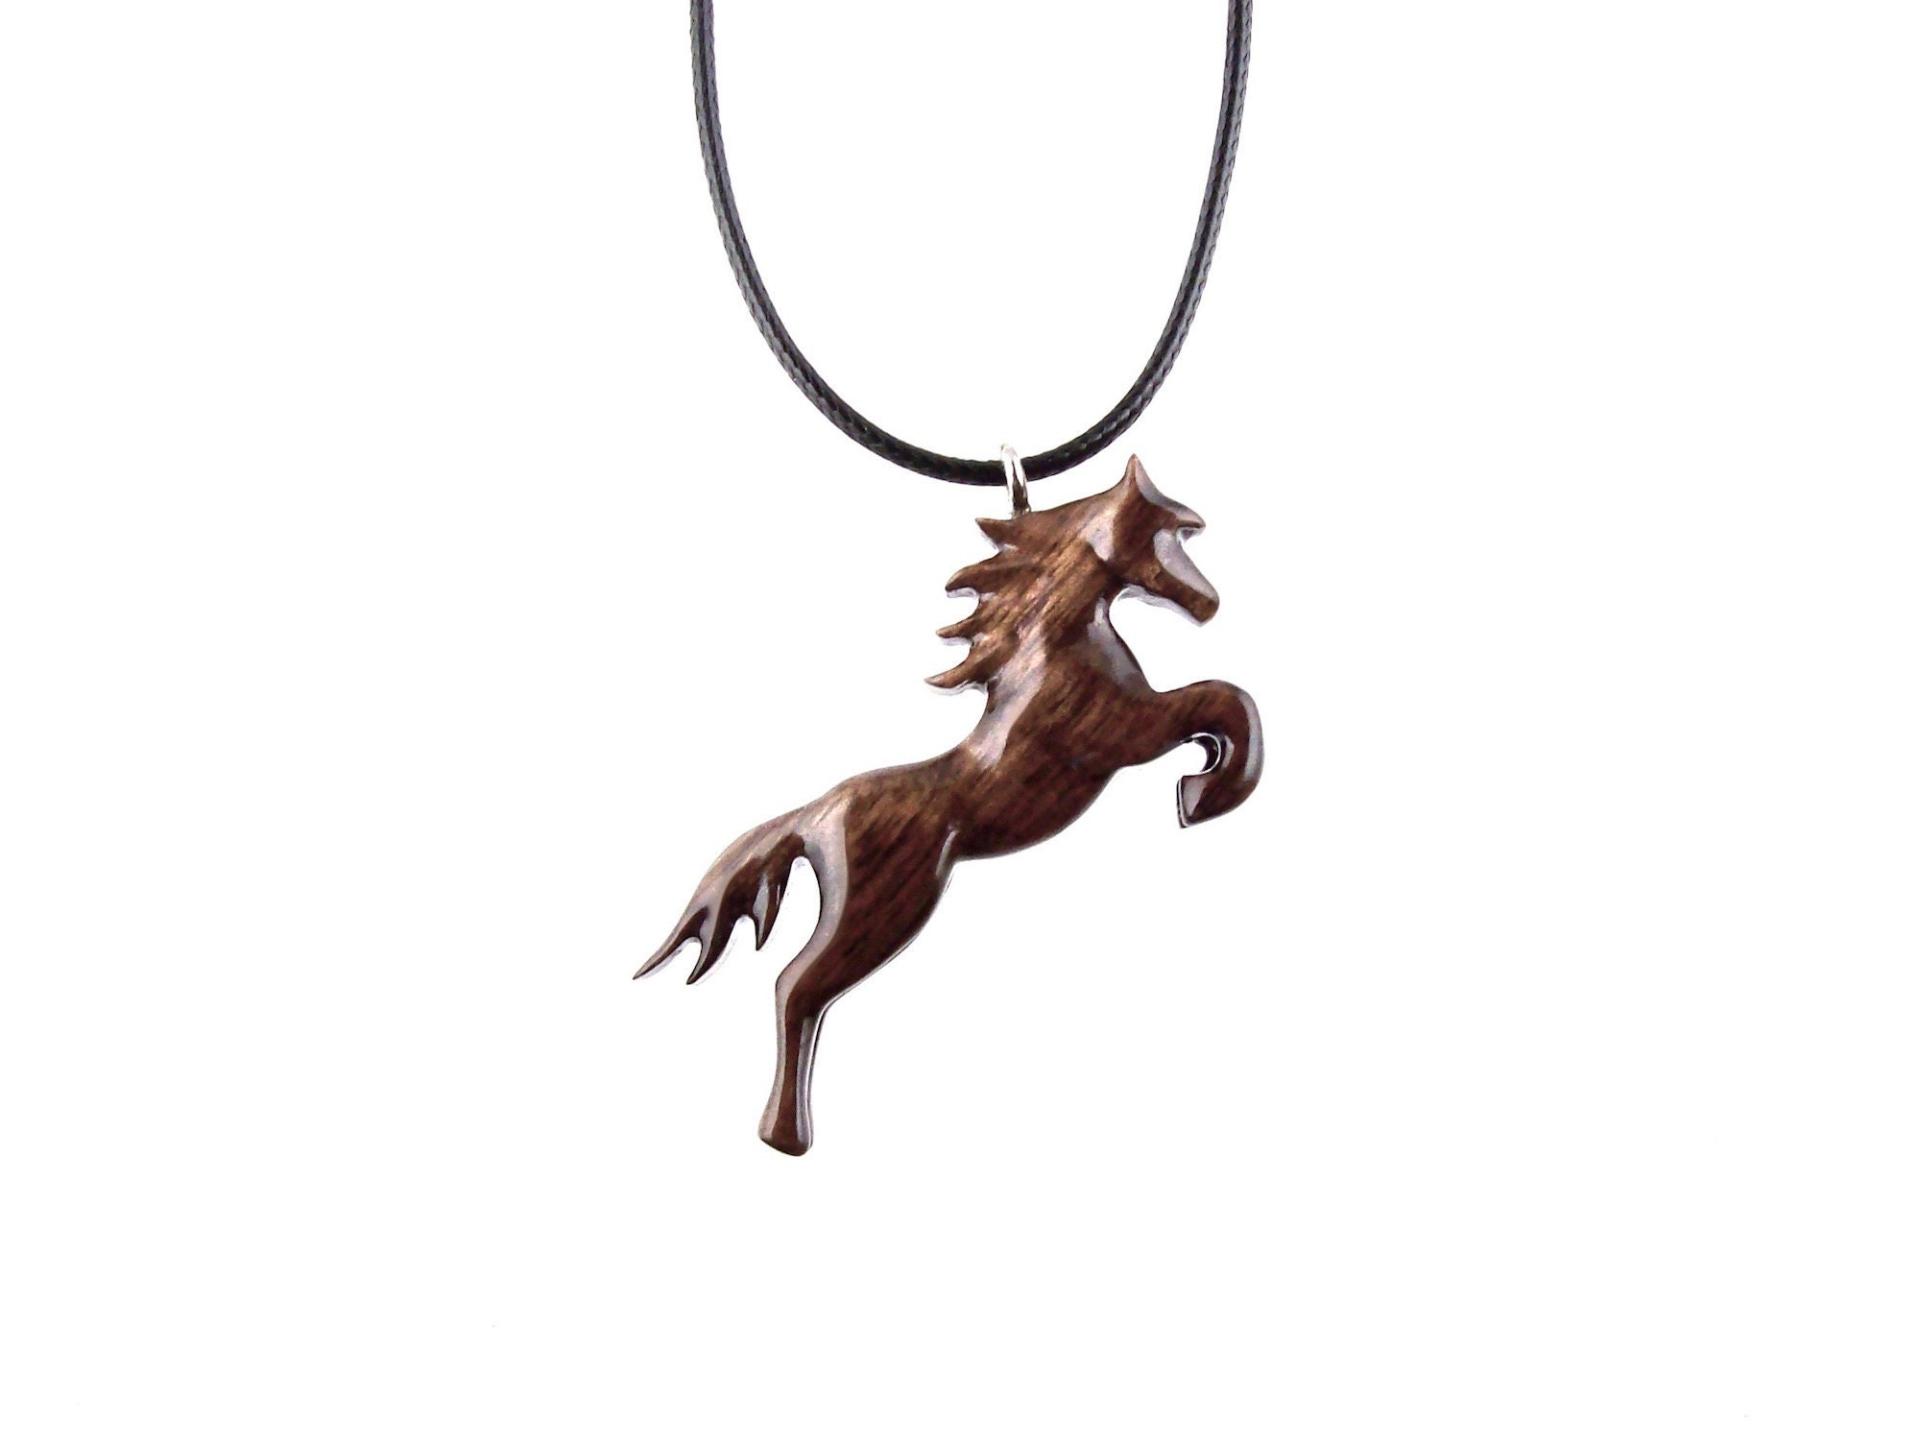 jumping horse necklace